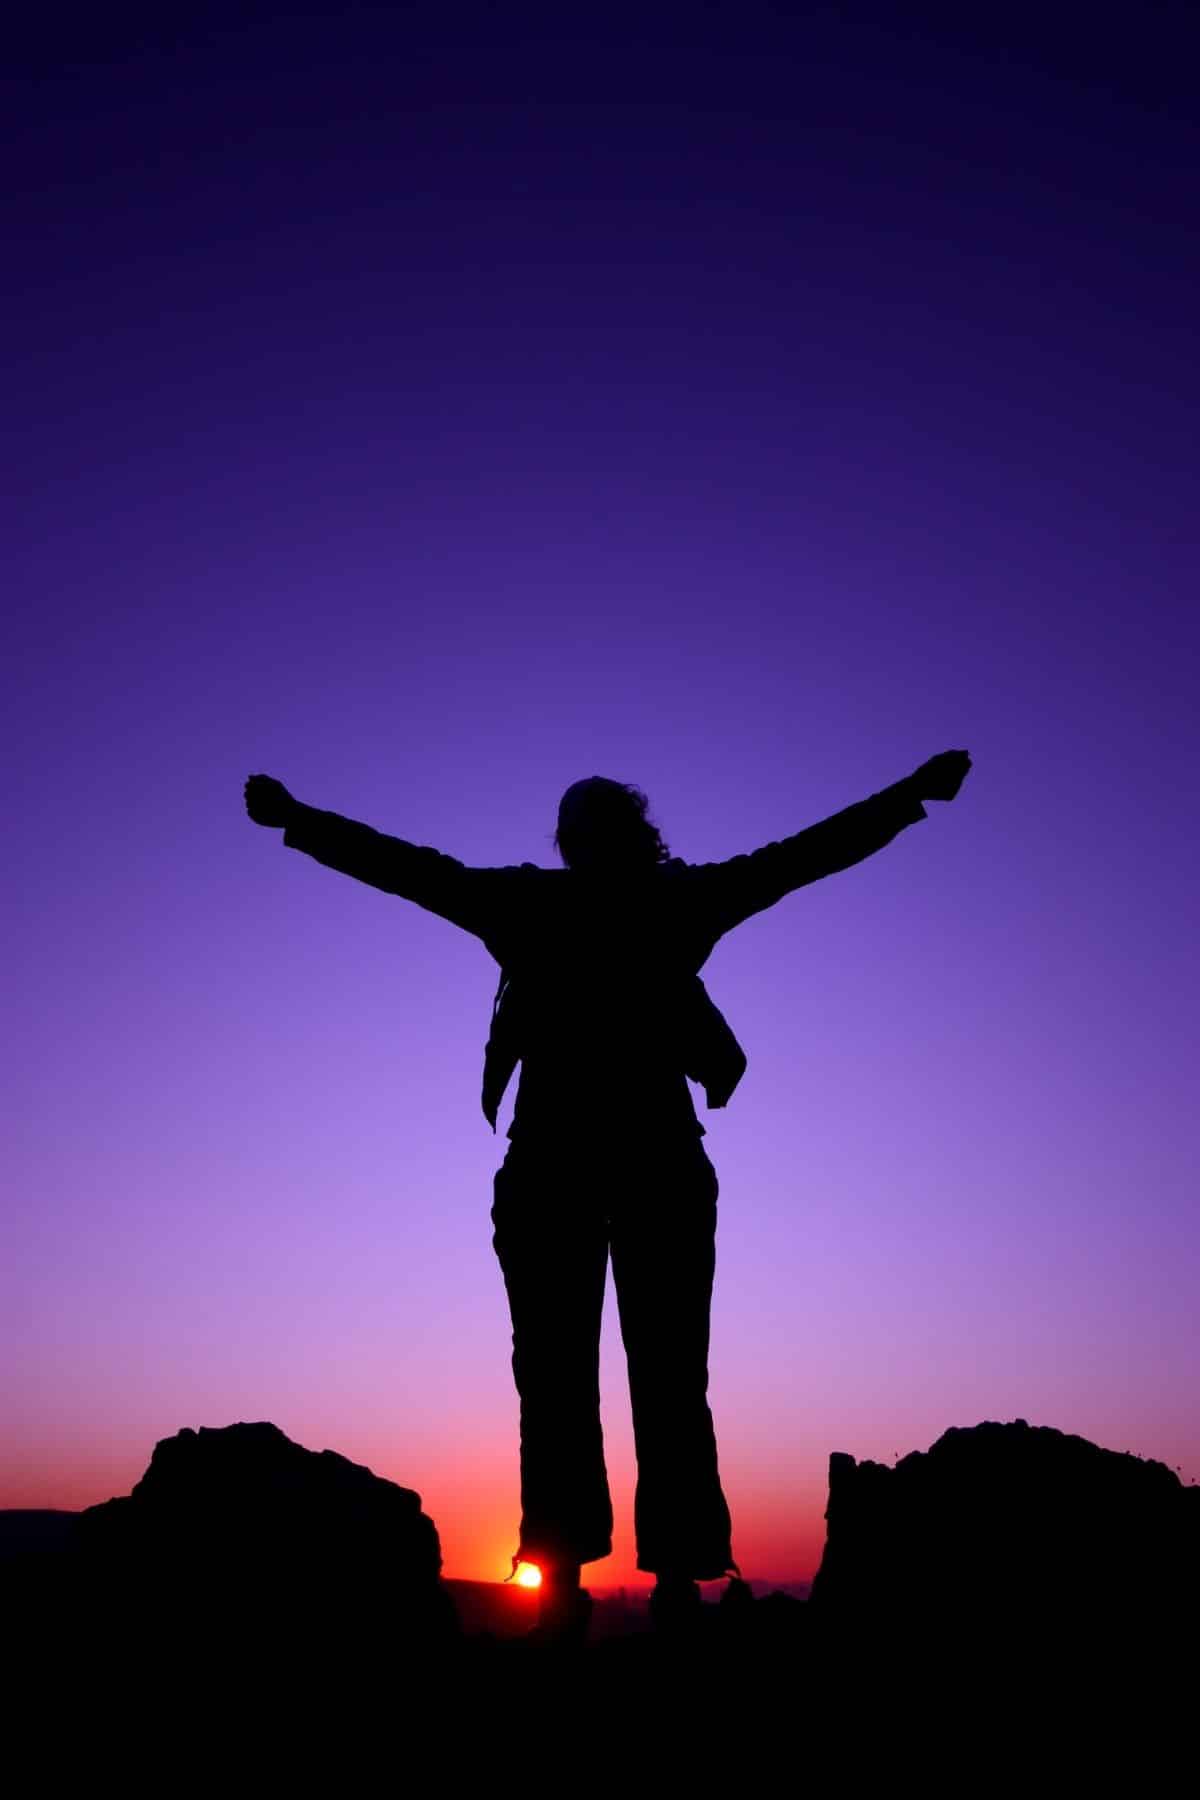 woman at sunset at the top of a mountain with her arms raised.